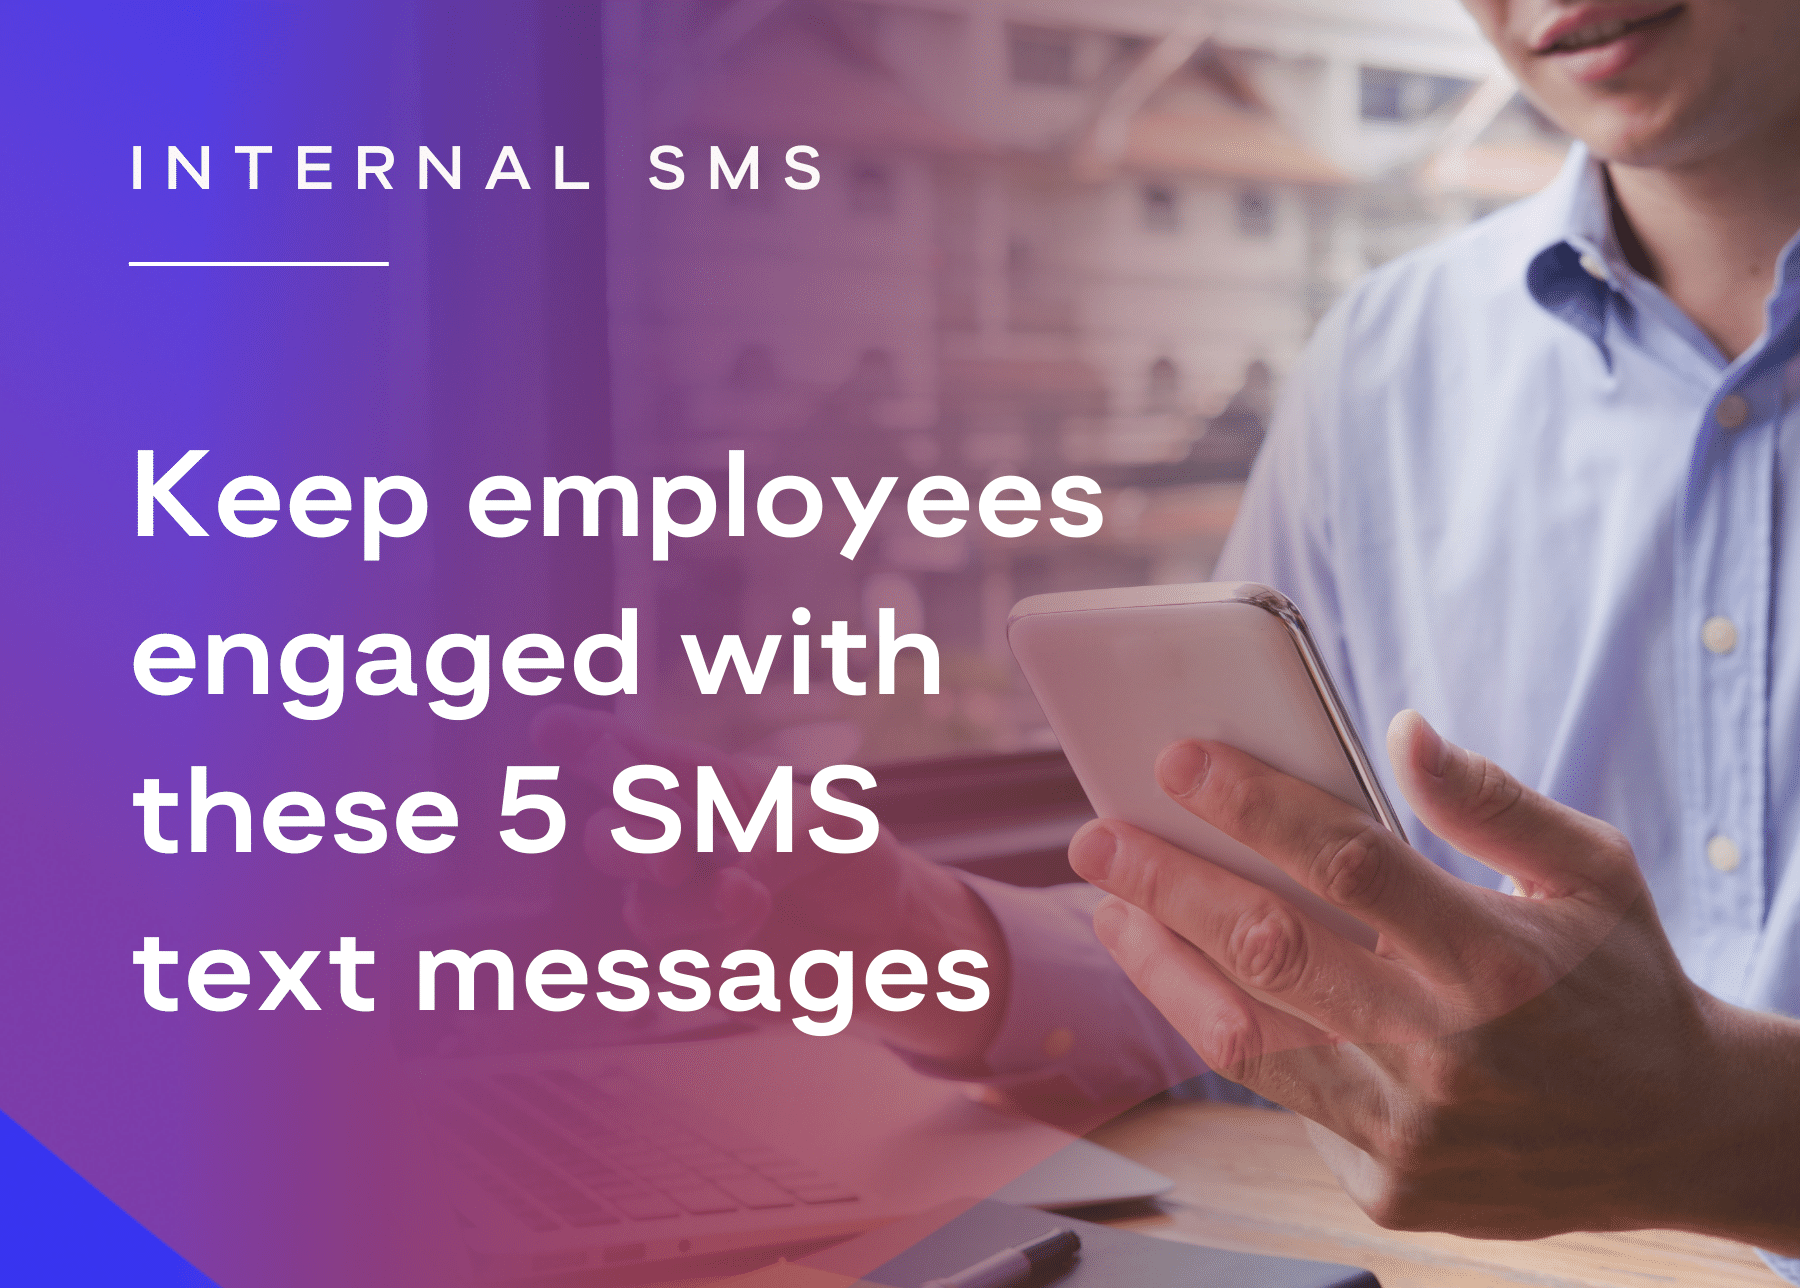 "Keep employees engaged with these 5 SMS text messages" paired with a man in a long-sleeved shirt looking at their phone.